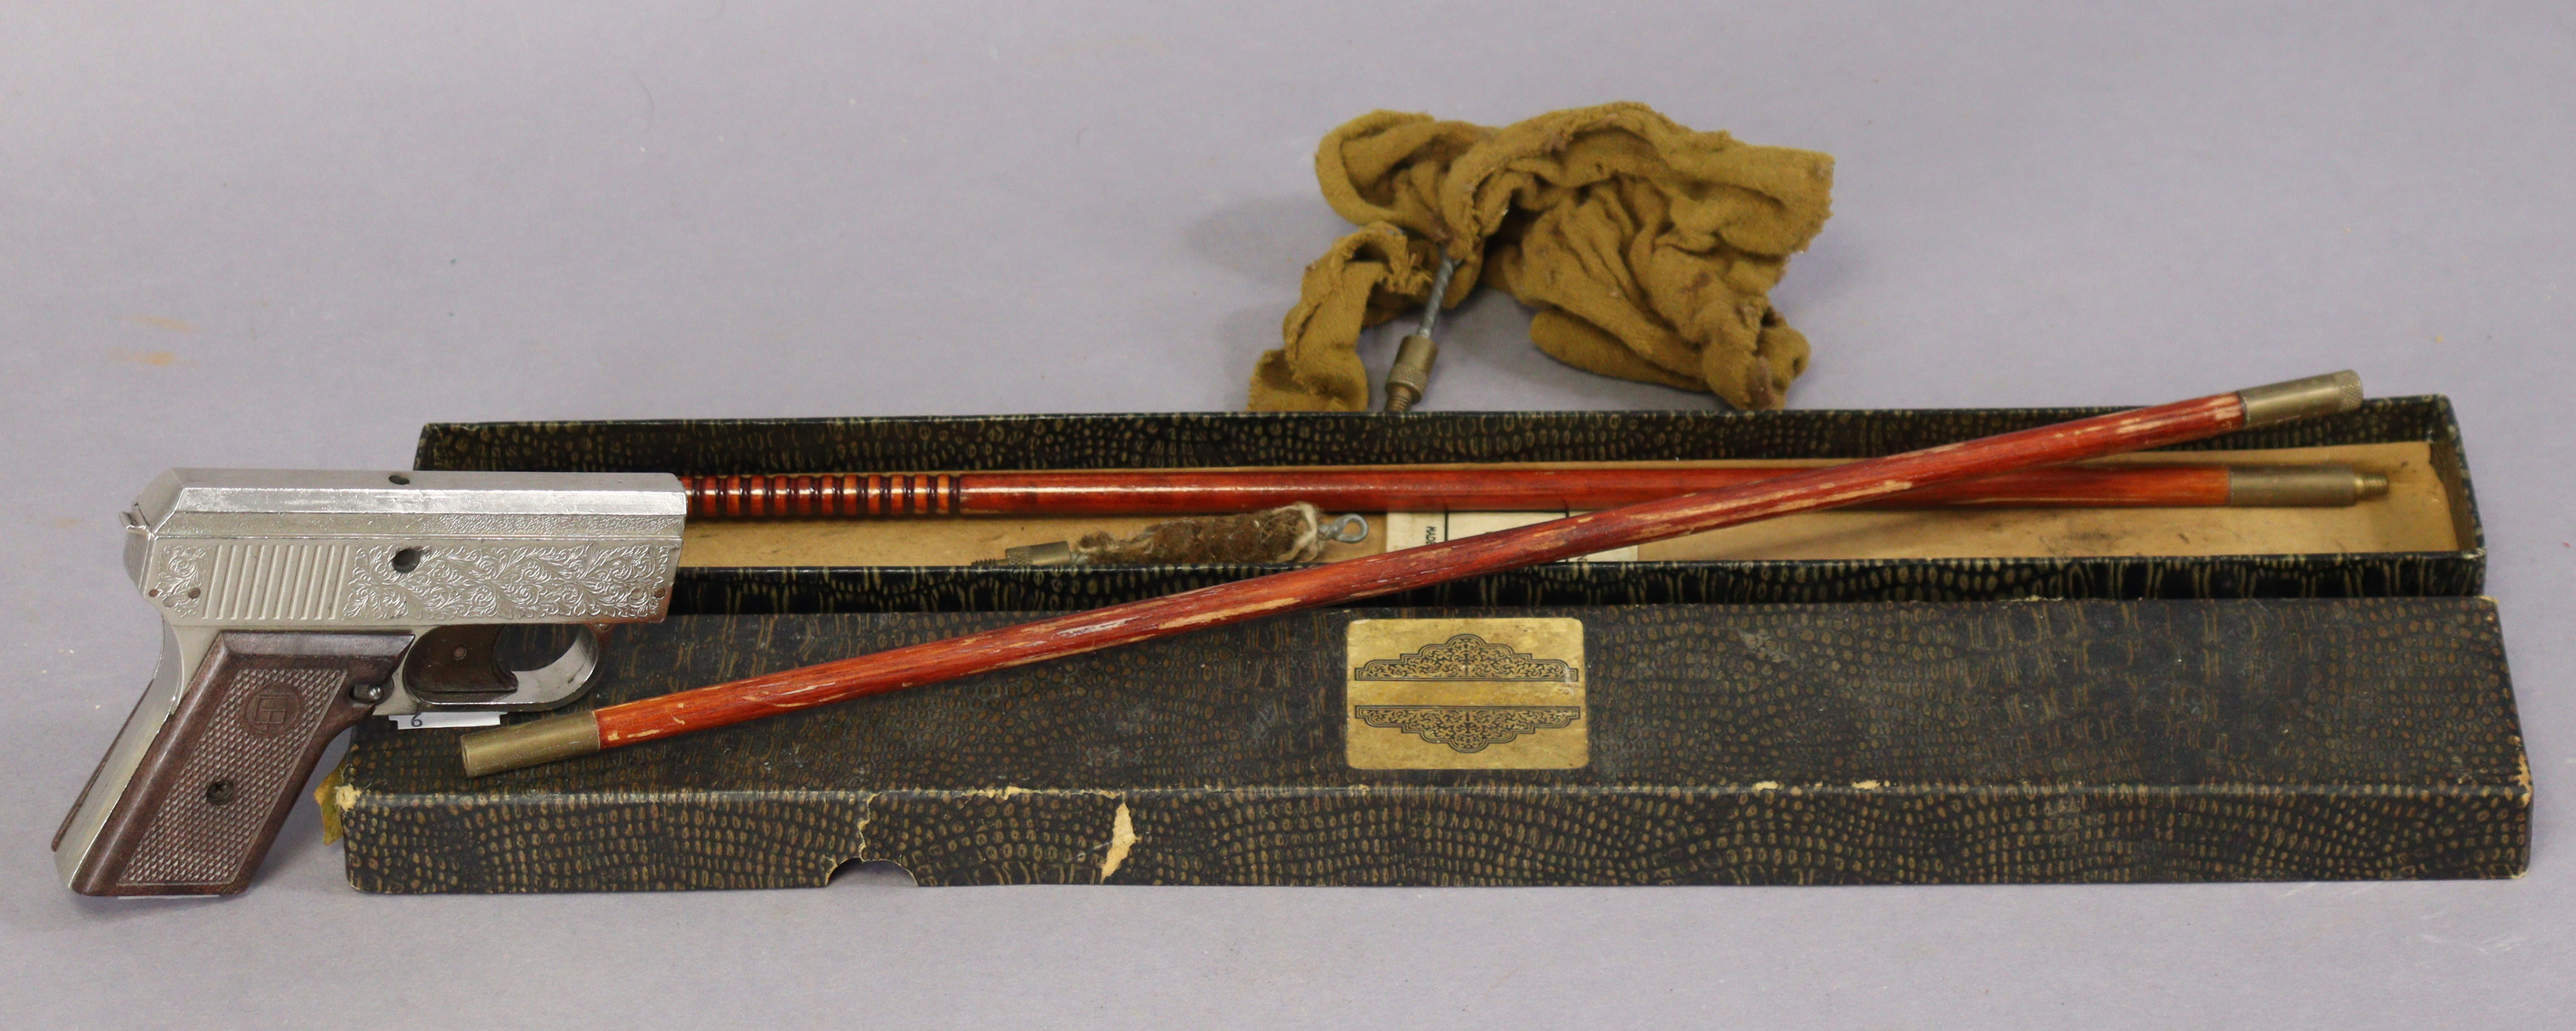 An Italian starter’s pistol; & a vintage part set of rifle cleaning rods, boxed.